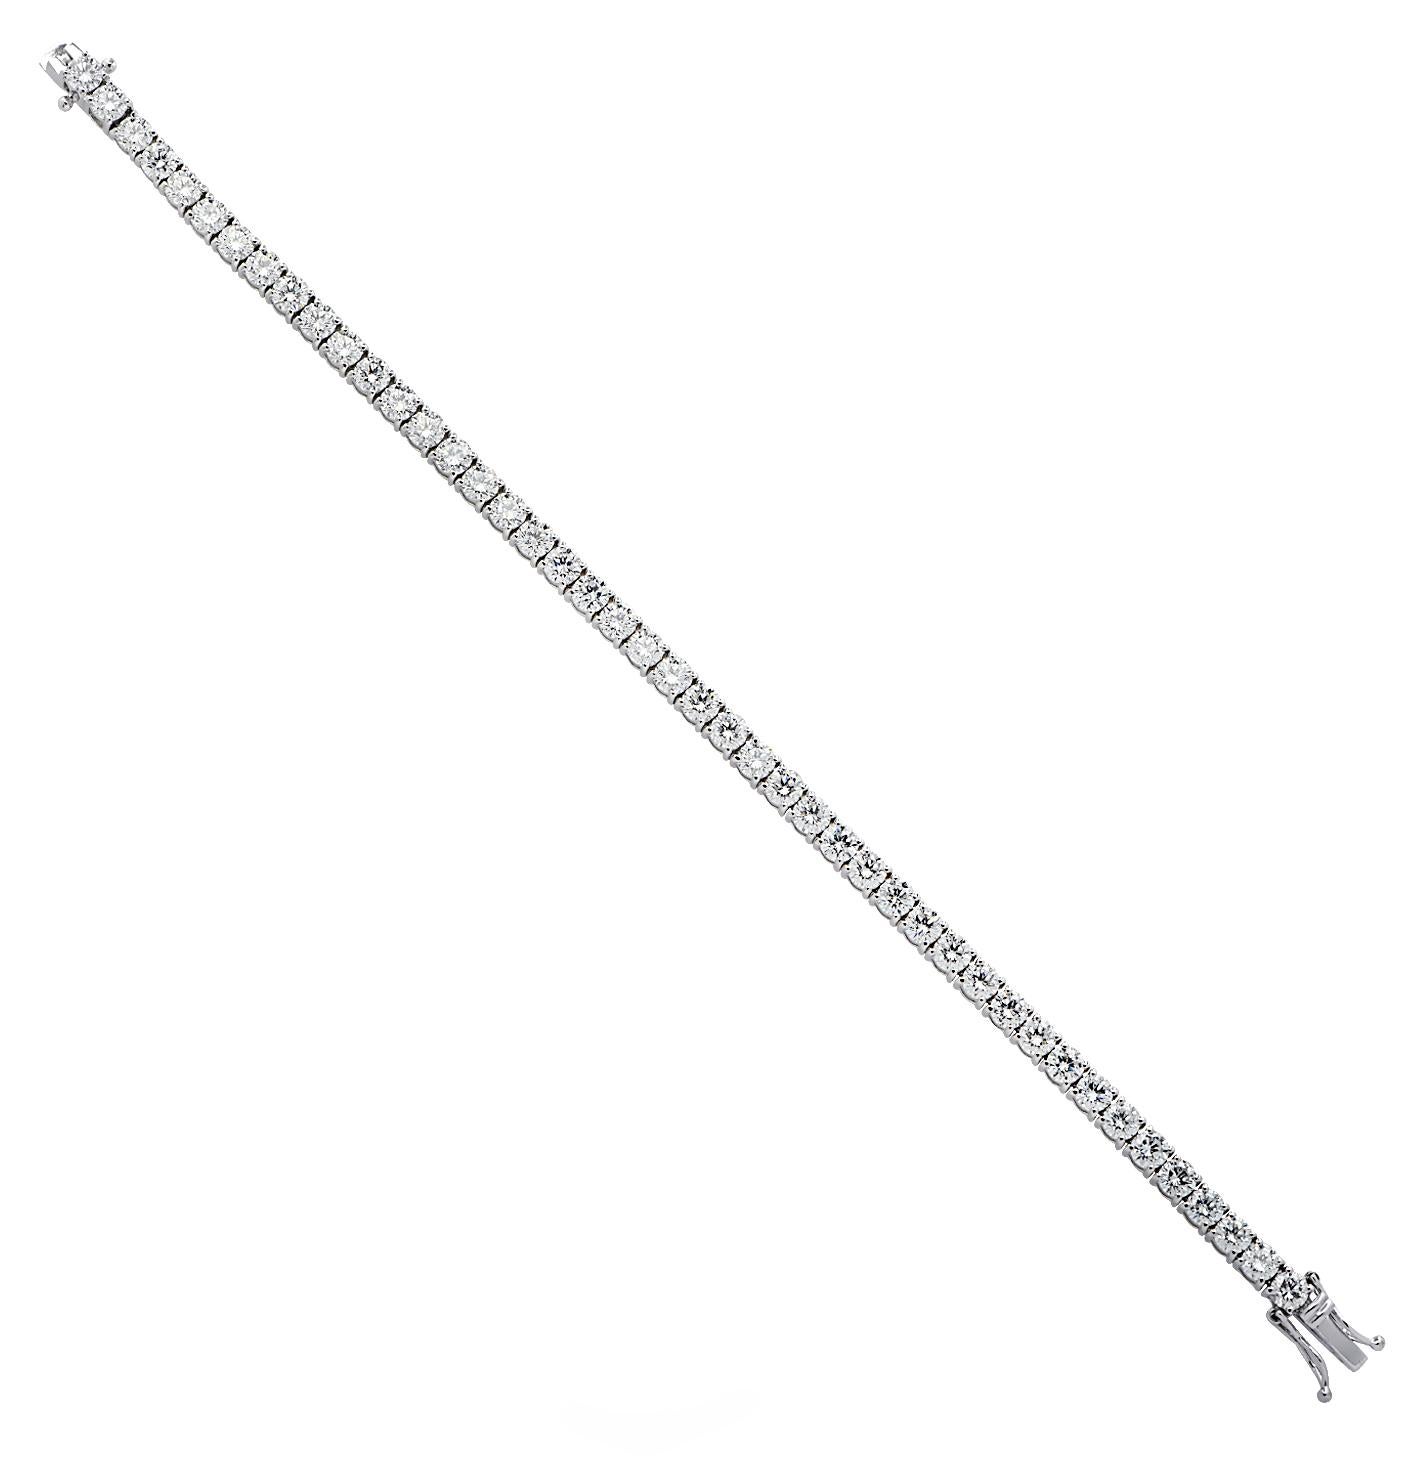 Exquisite Vivid Diamonds diamond tennis bracelet crafted in 18 karat white gold, showcasing 44 stunning round brilliant cut diamonds weighing approximately 11.14 carats total, D-E color, VS-SI clarity. Each diamond is carefully selected, perfectly